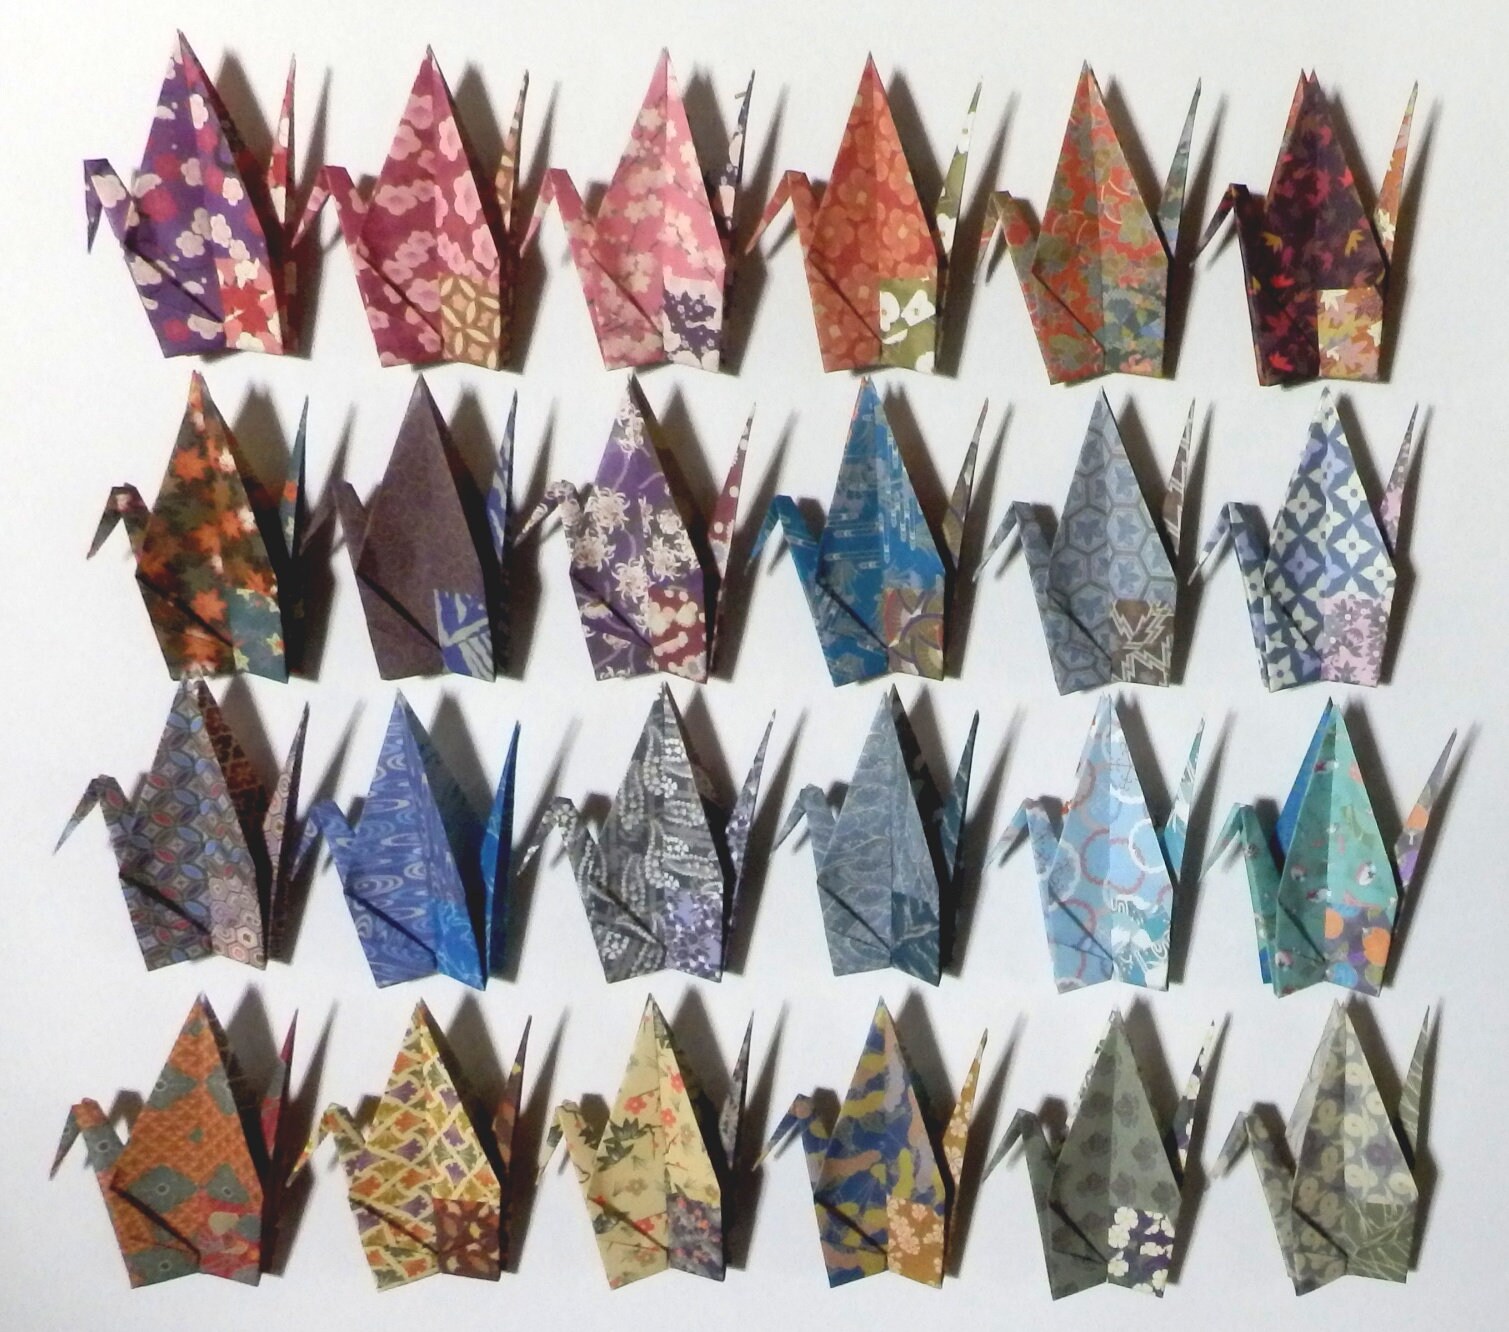 96 Large Origami Paper Cranes Made of 15cm 6 Inches Japanese Chiyogami  Paper 24 Patterns Decoration Ornament Home Party Wedding Art 